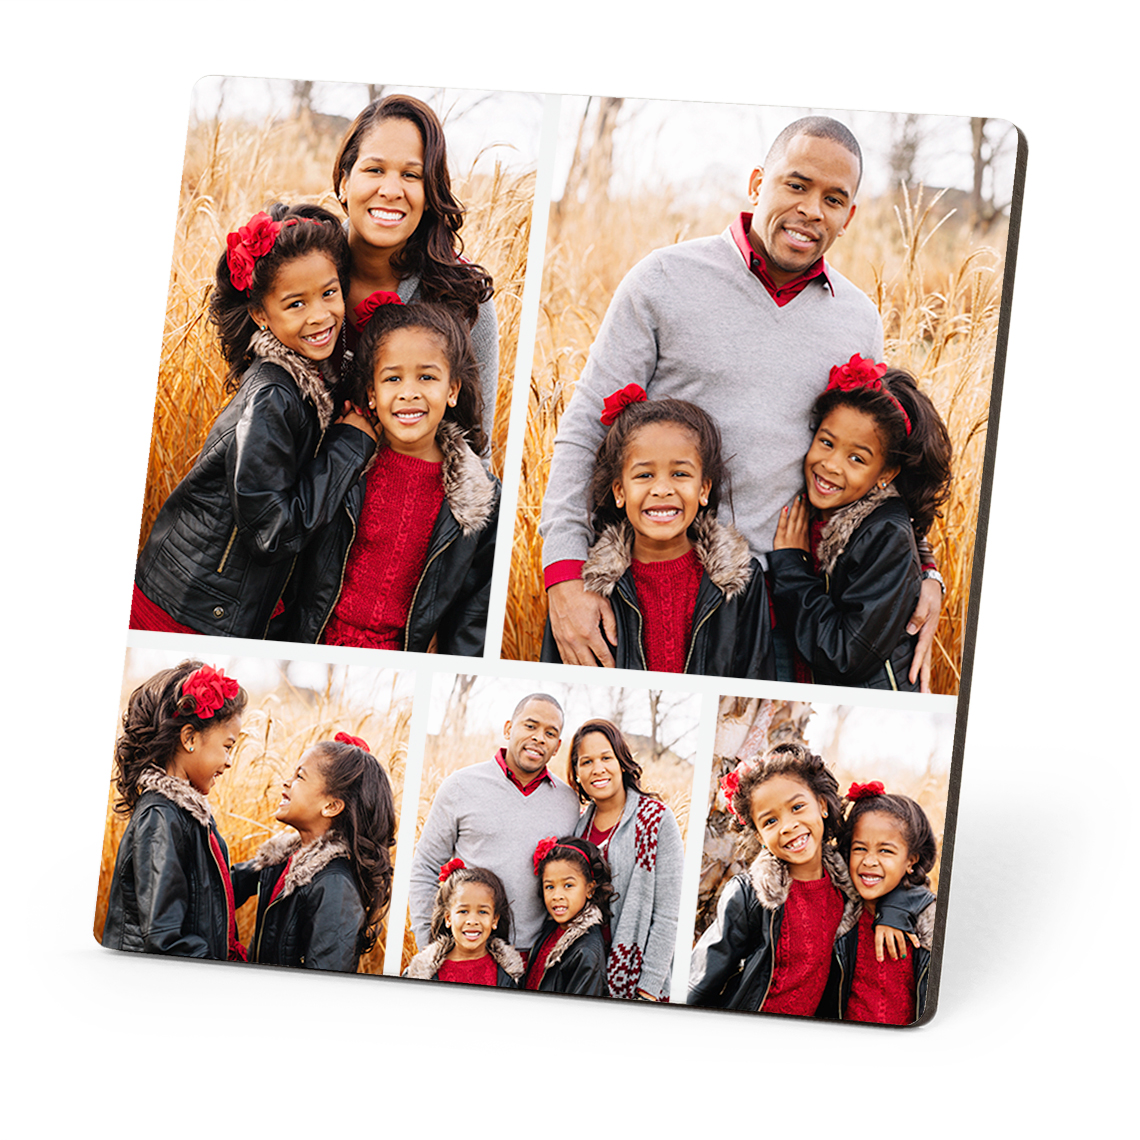  Photo Booth Frames -8 x 10 Inch Photo Frame with Mat for Three Photo  Booth Strips White 8x10 3 Pictures